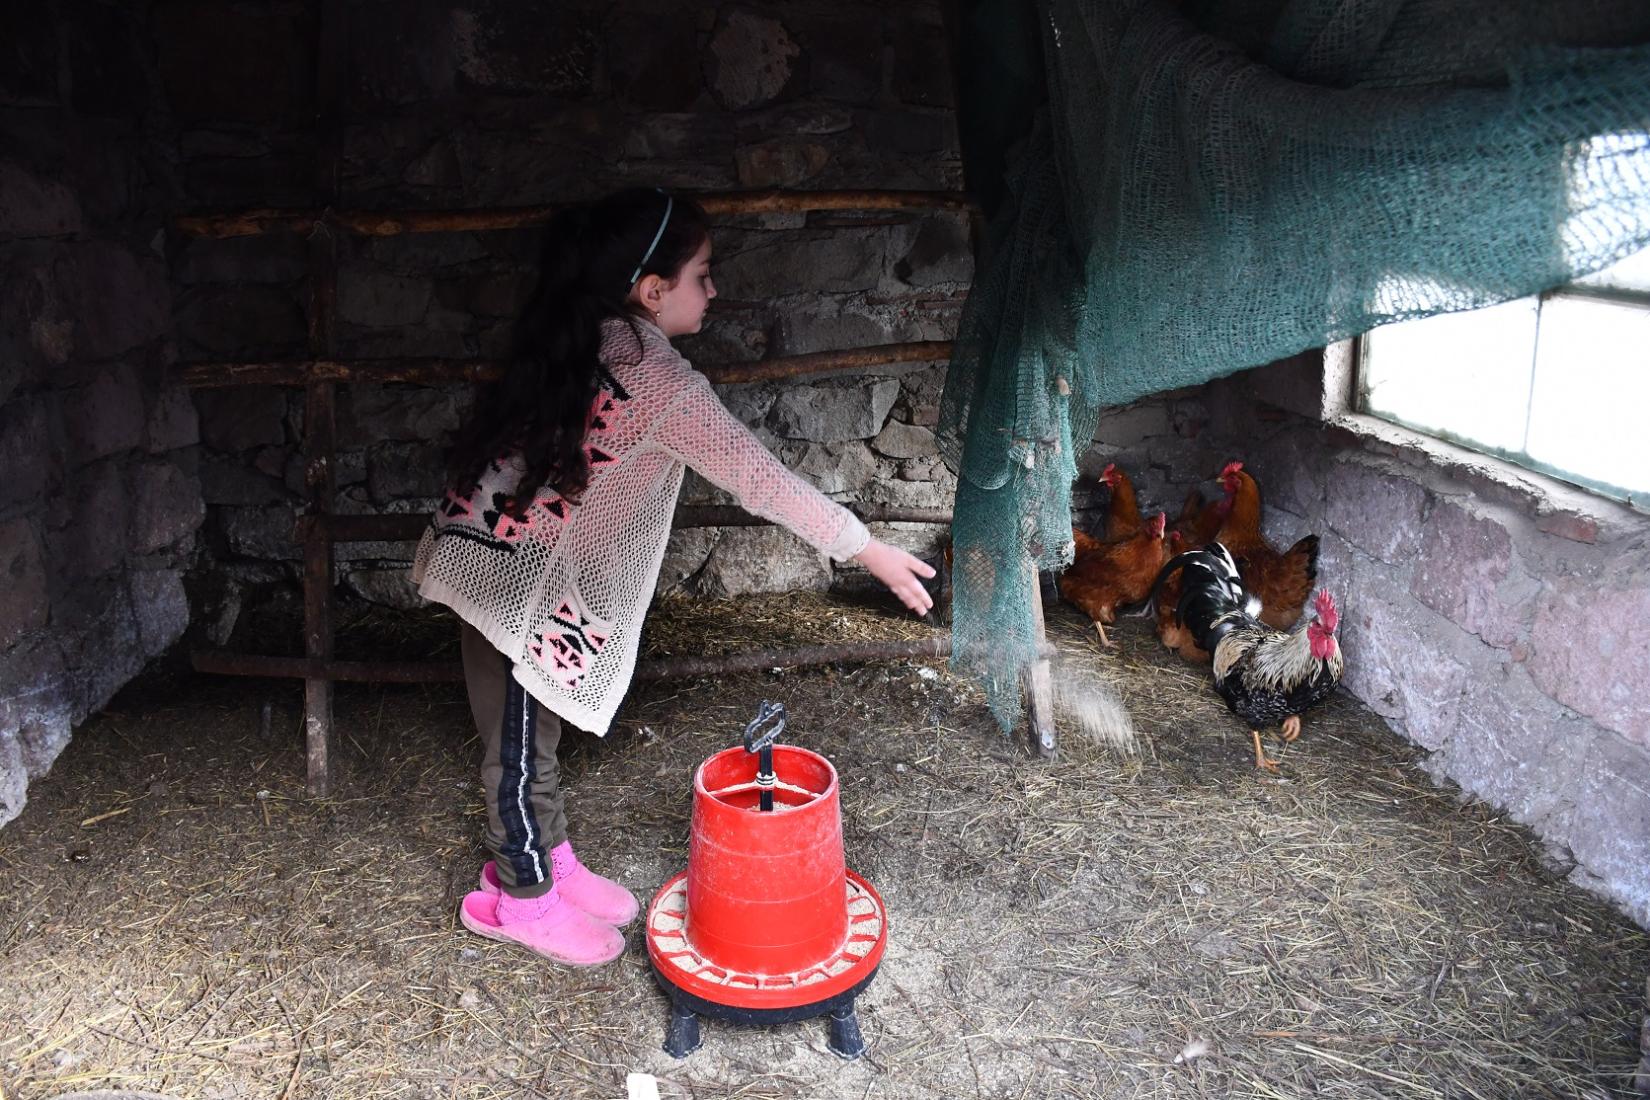 The little girl helps her parents by feeding the hens.